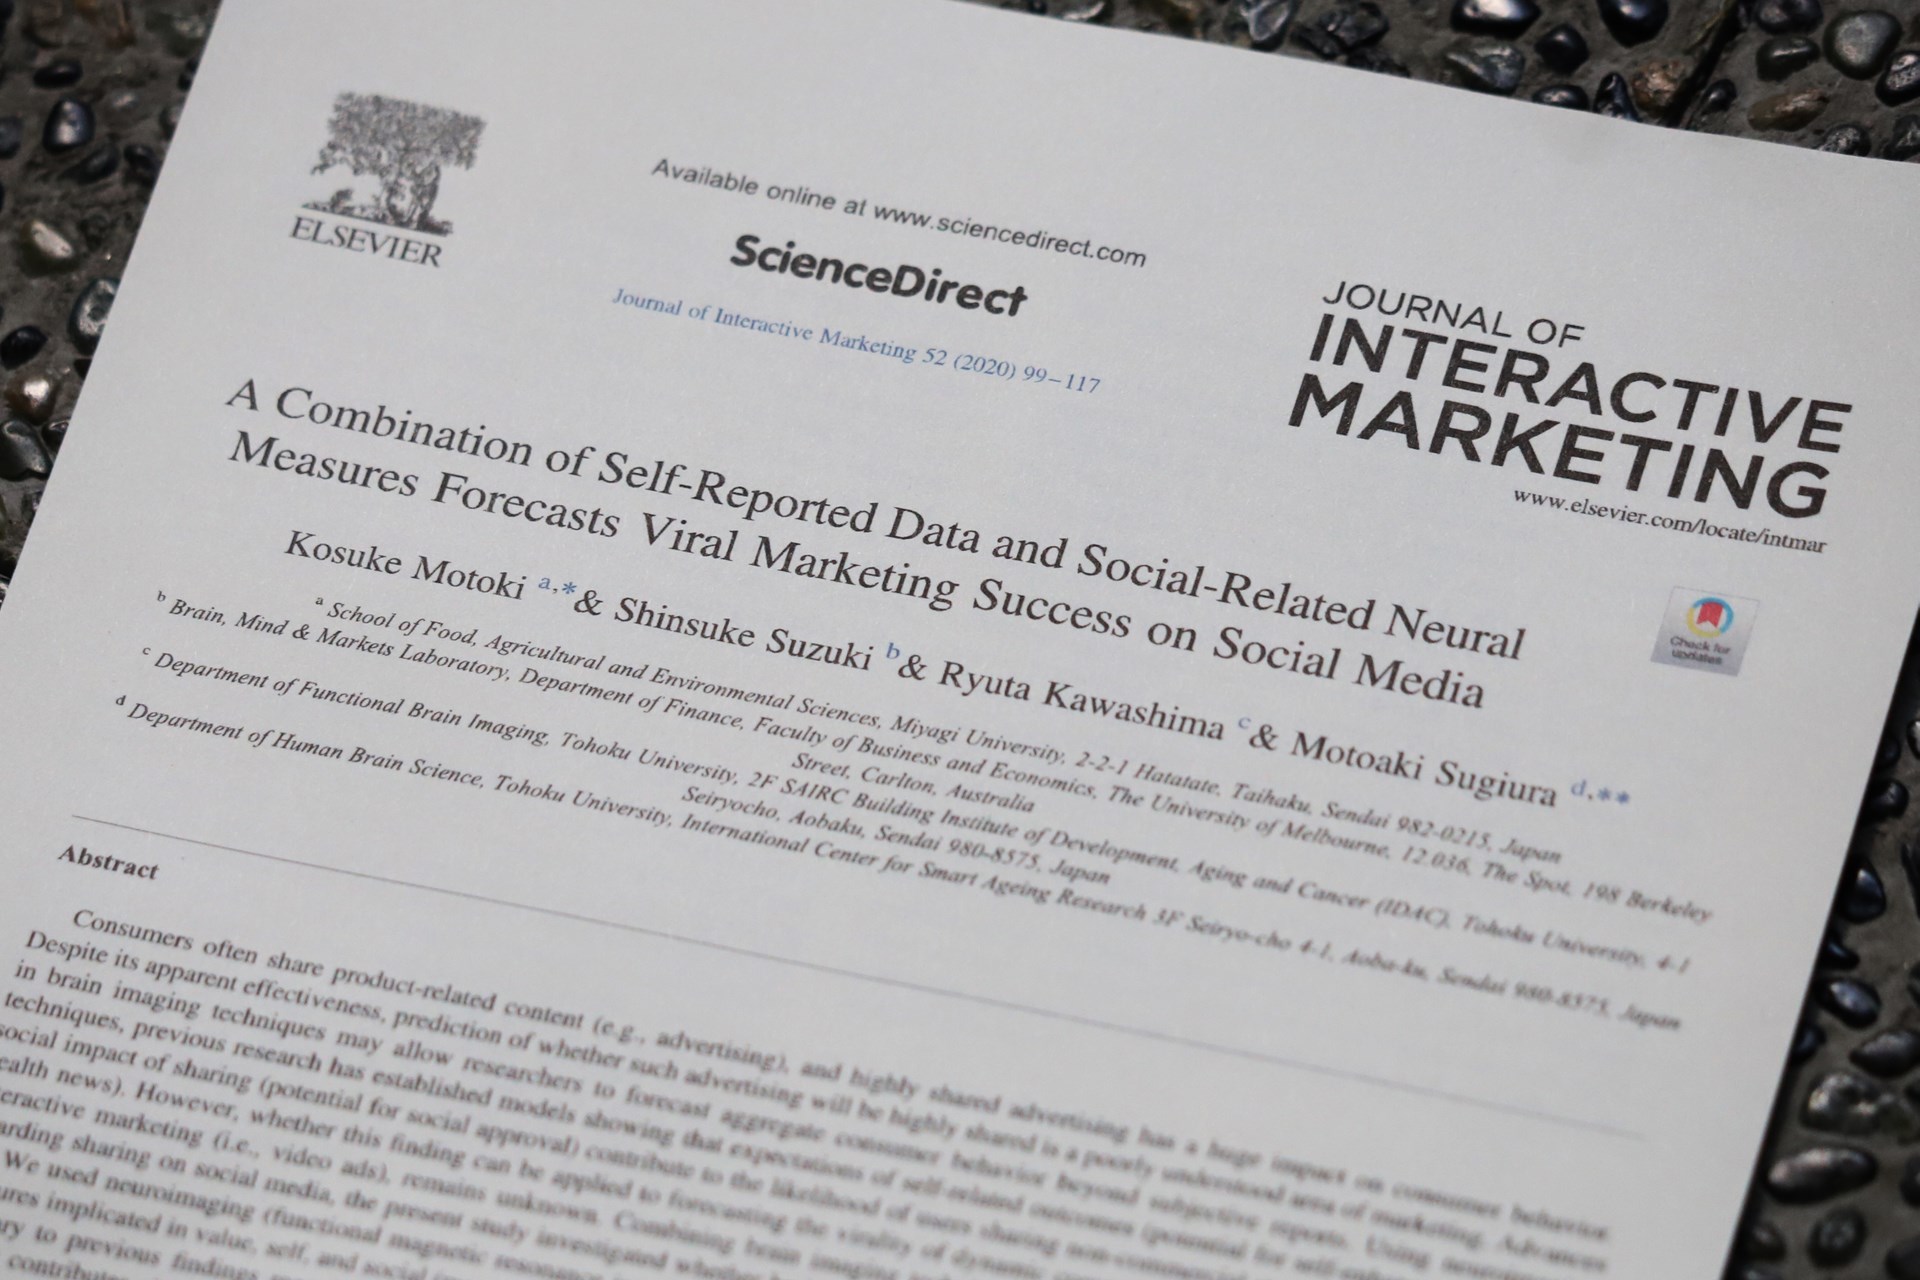 A Combination of Self-Reported Data and Social-Related Neural Measures Forecasts Viral Marketing Success on Social Media